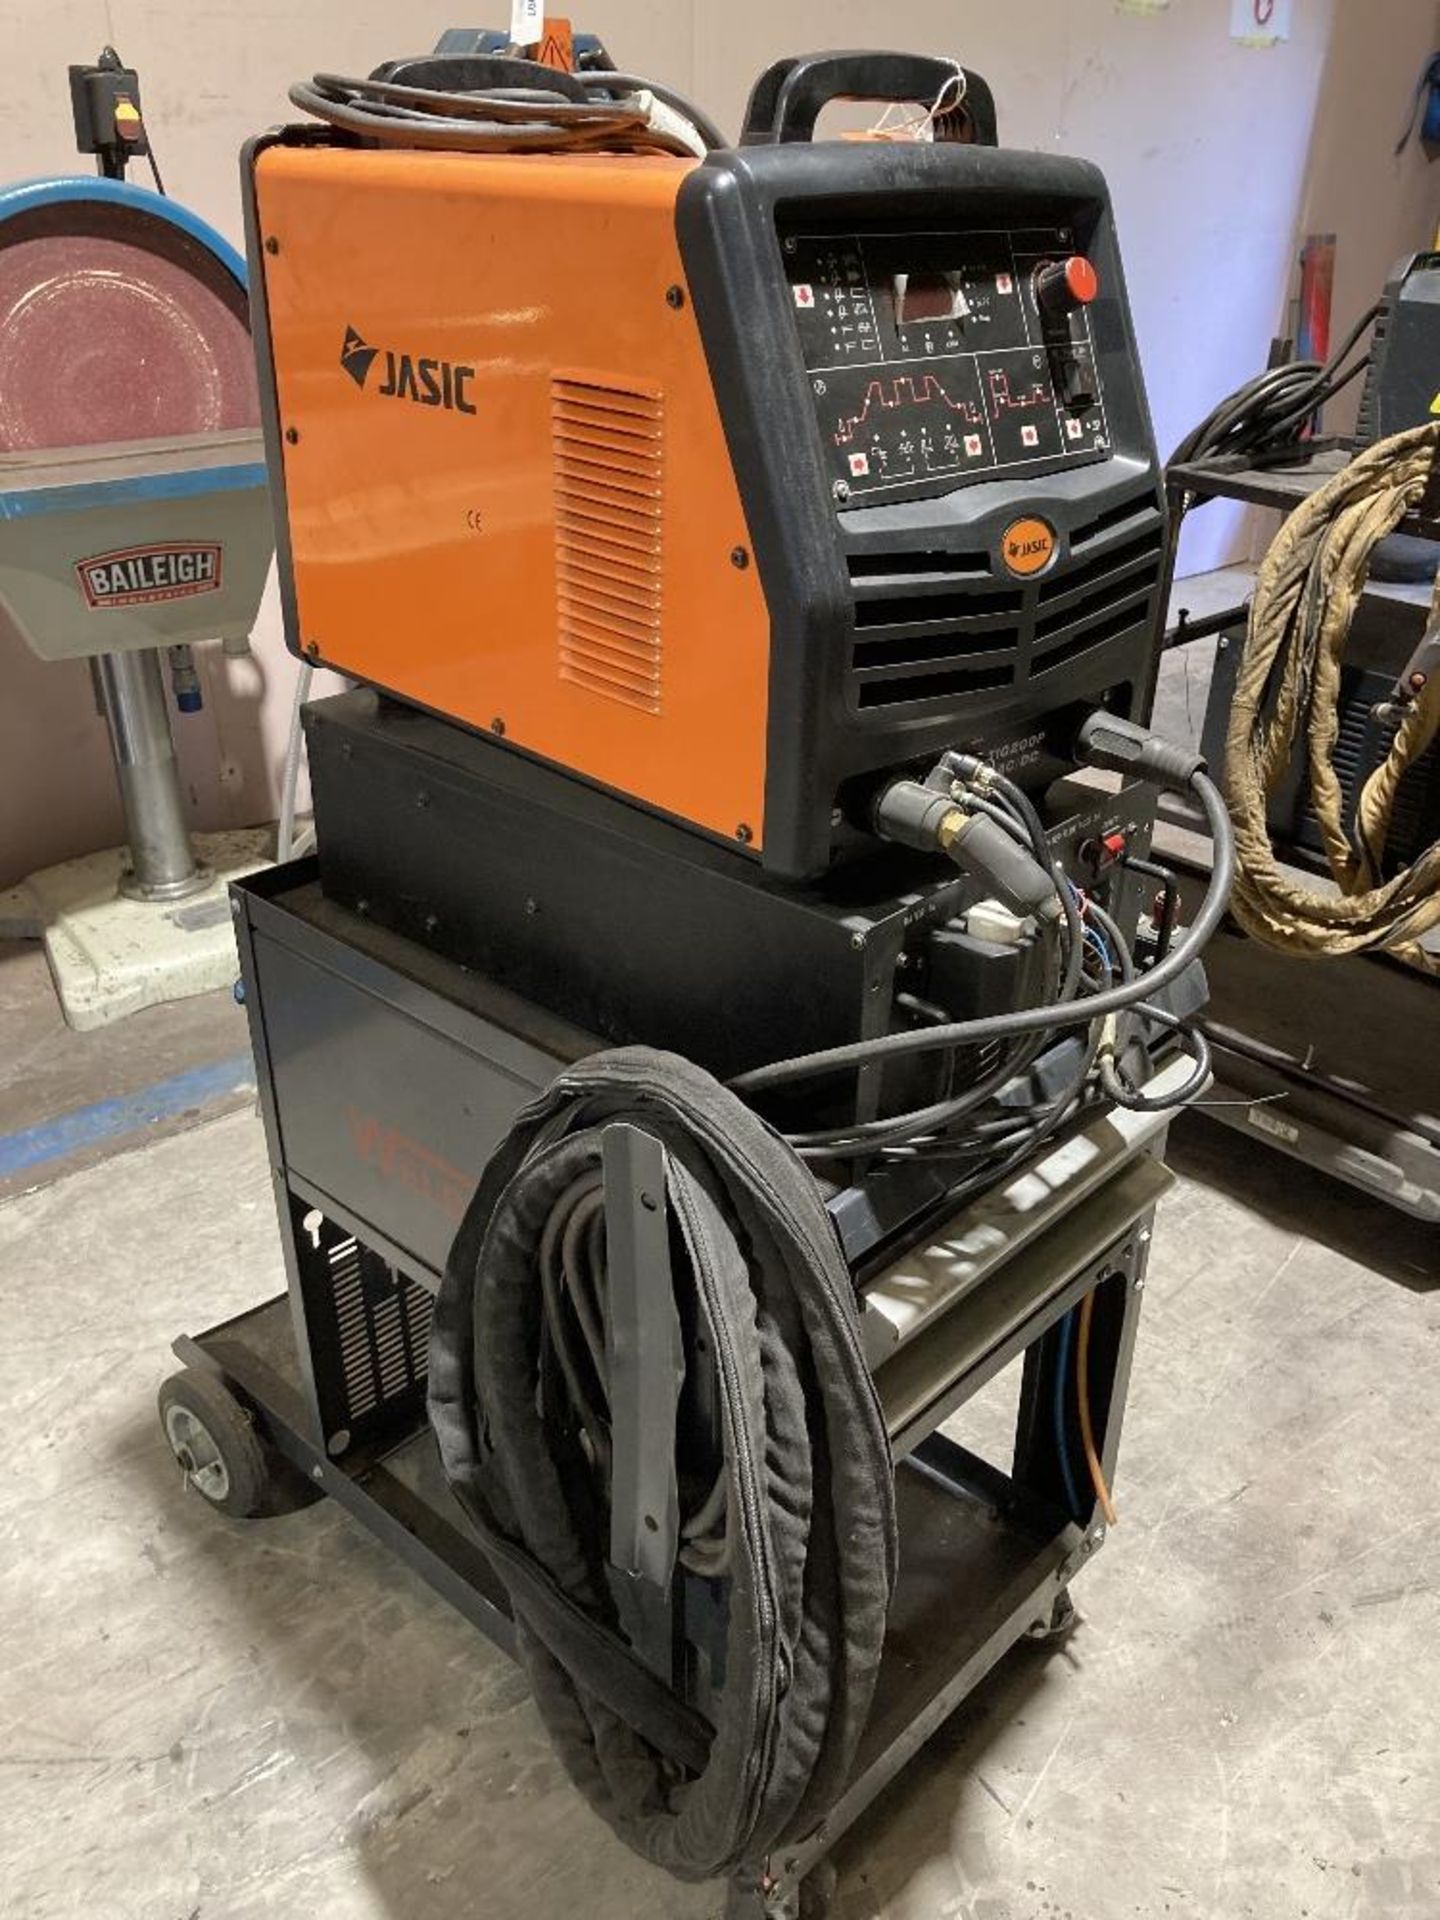 Jasic Tig 200P AC DC pulse inverter welder with water cooler & mobile stand